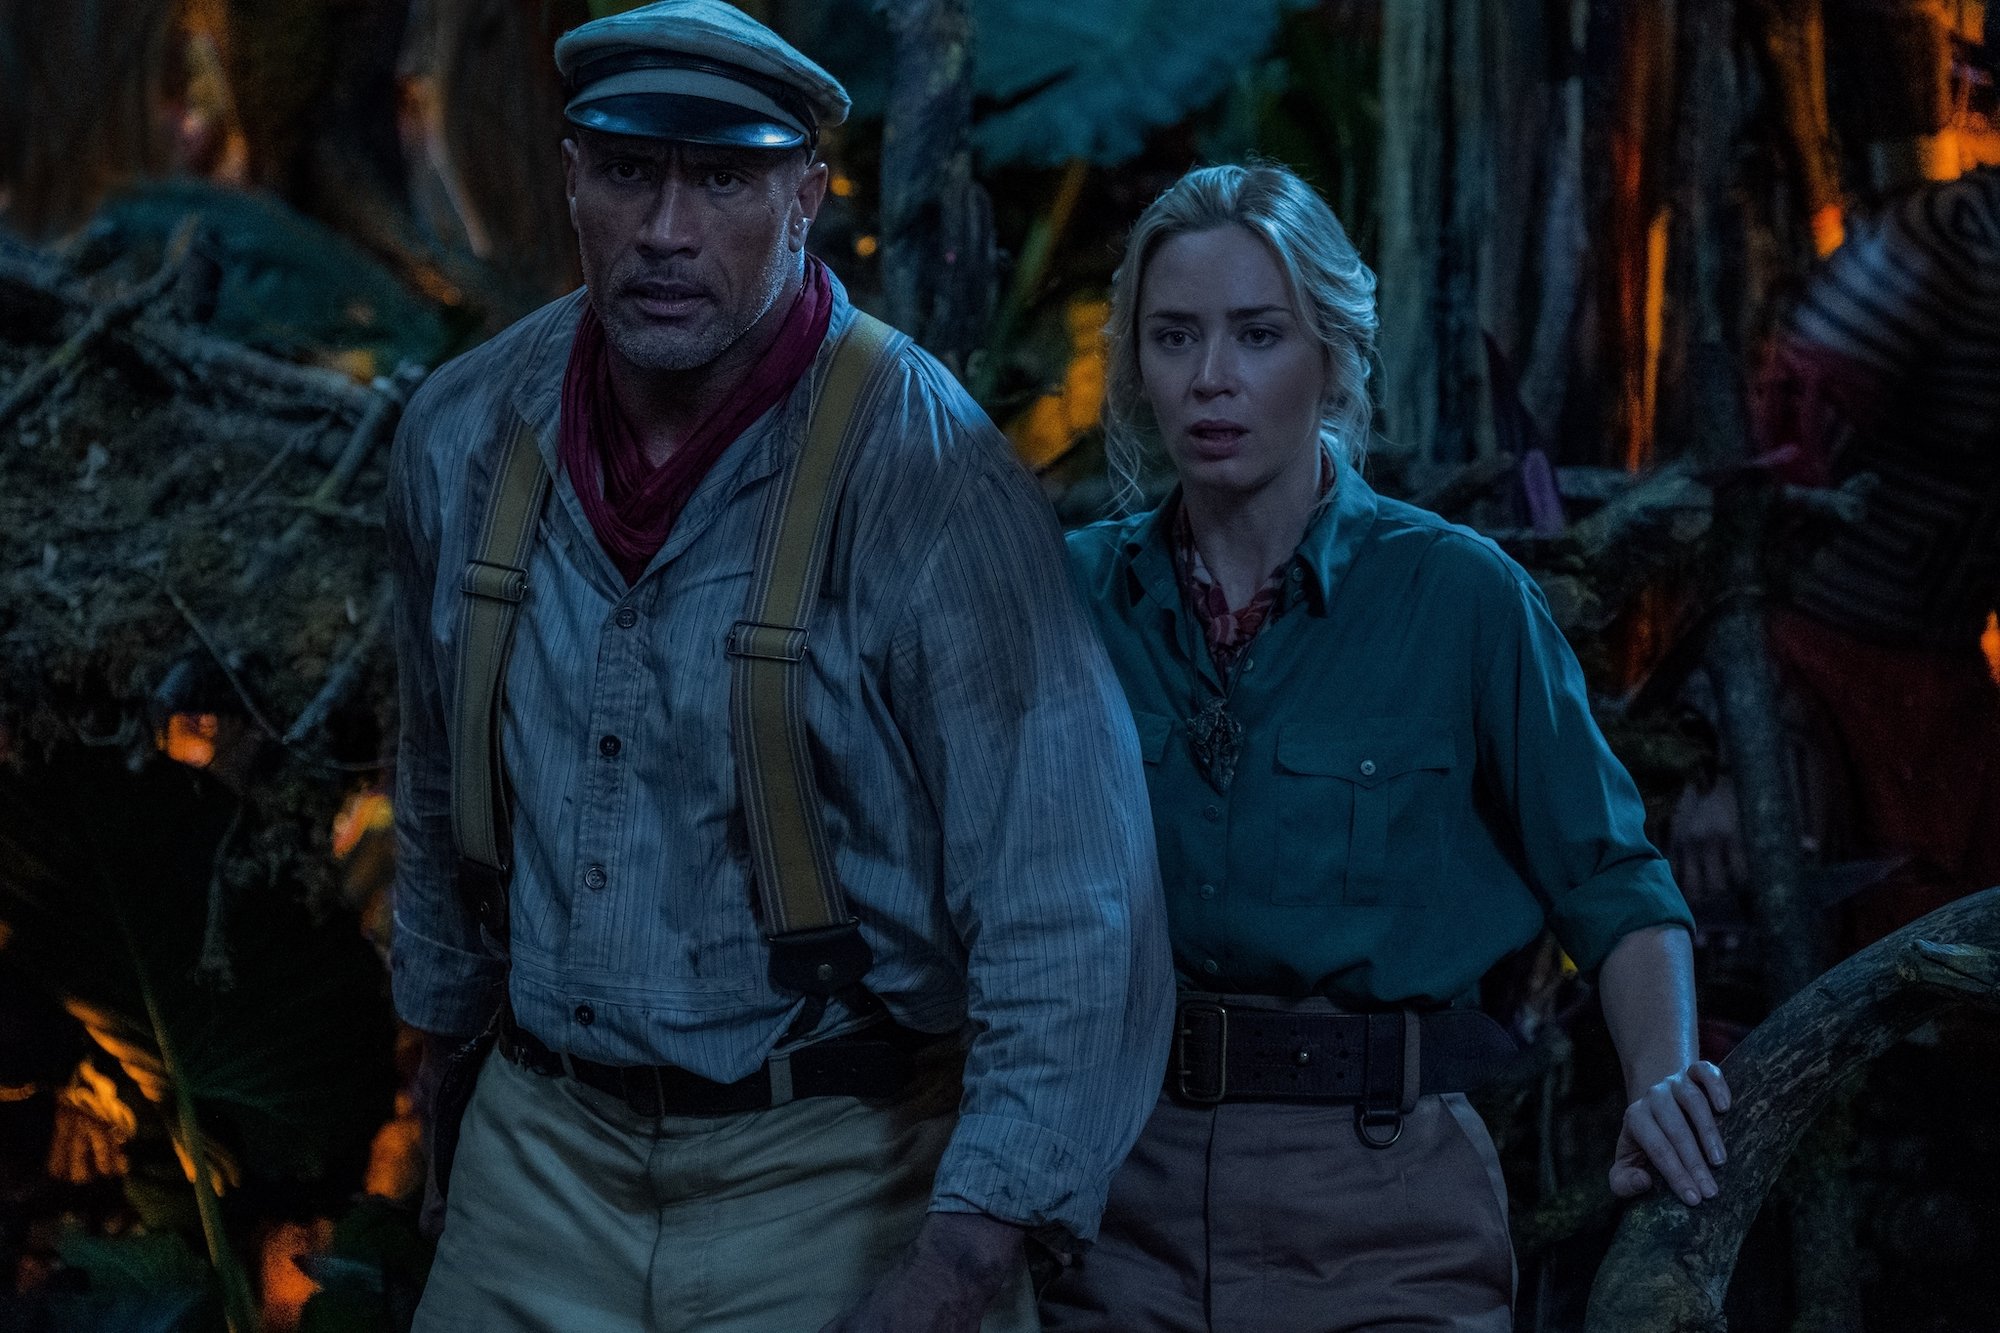 Dwayne Johnson and Emily Blunt explore the jungle